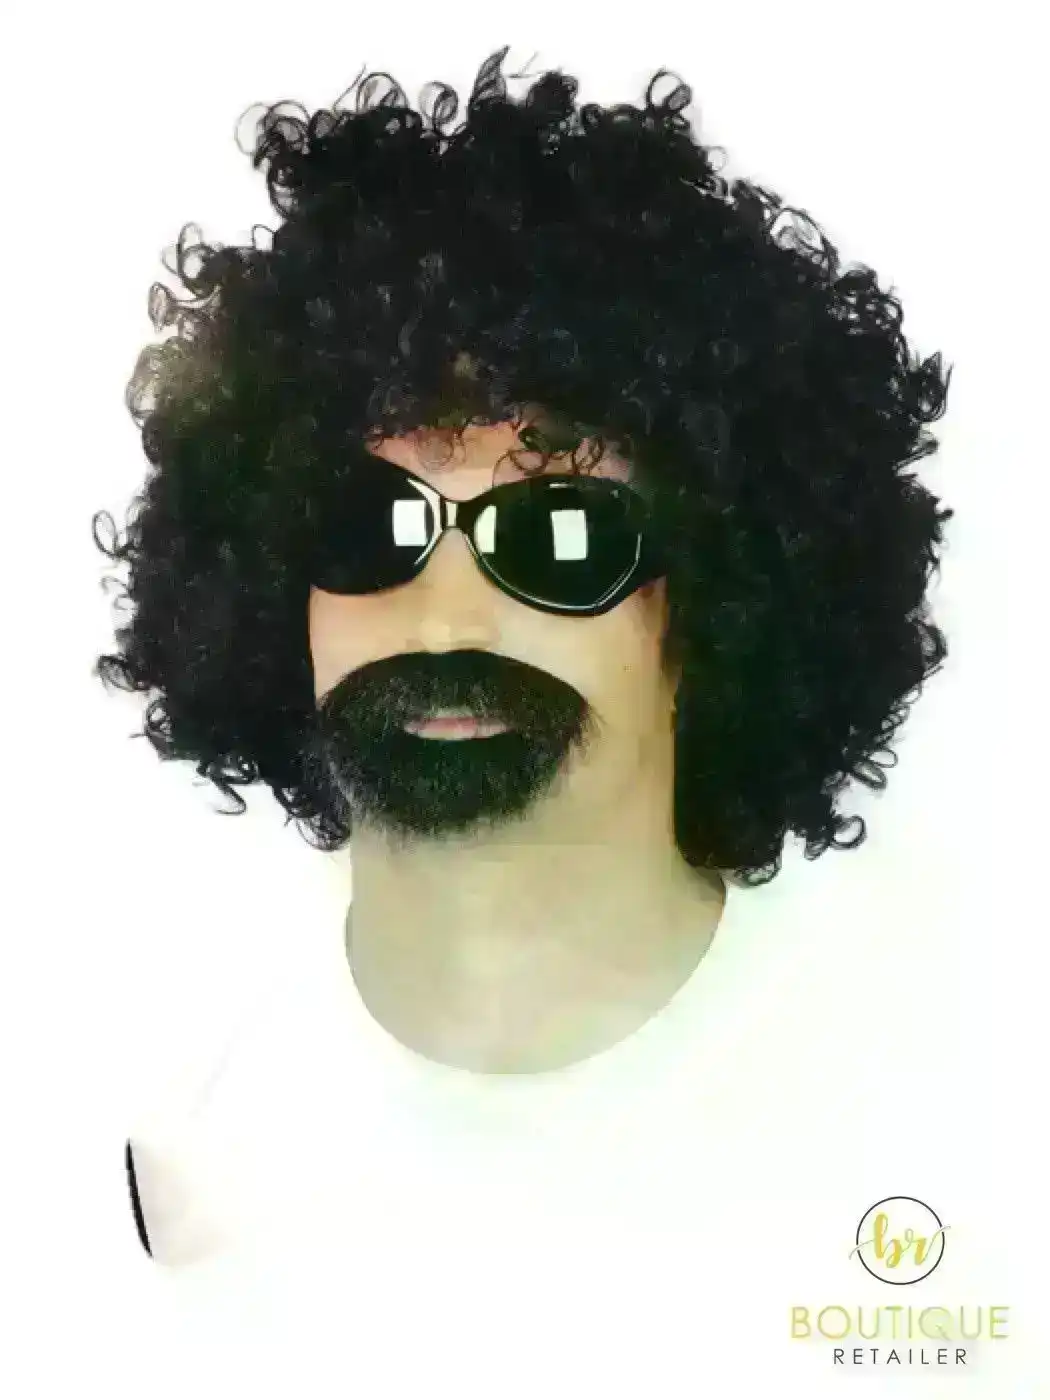 Deluxe AFRO MAN KIT Wig Glasses Beard Costume Party Funky 70s